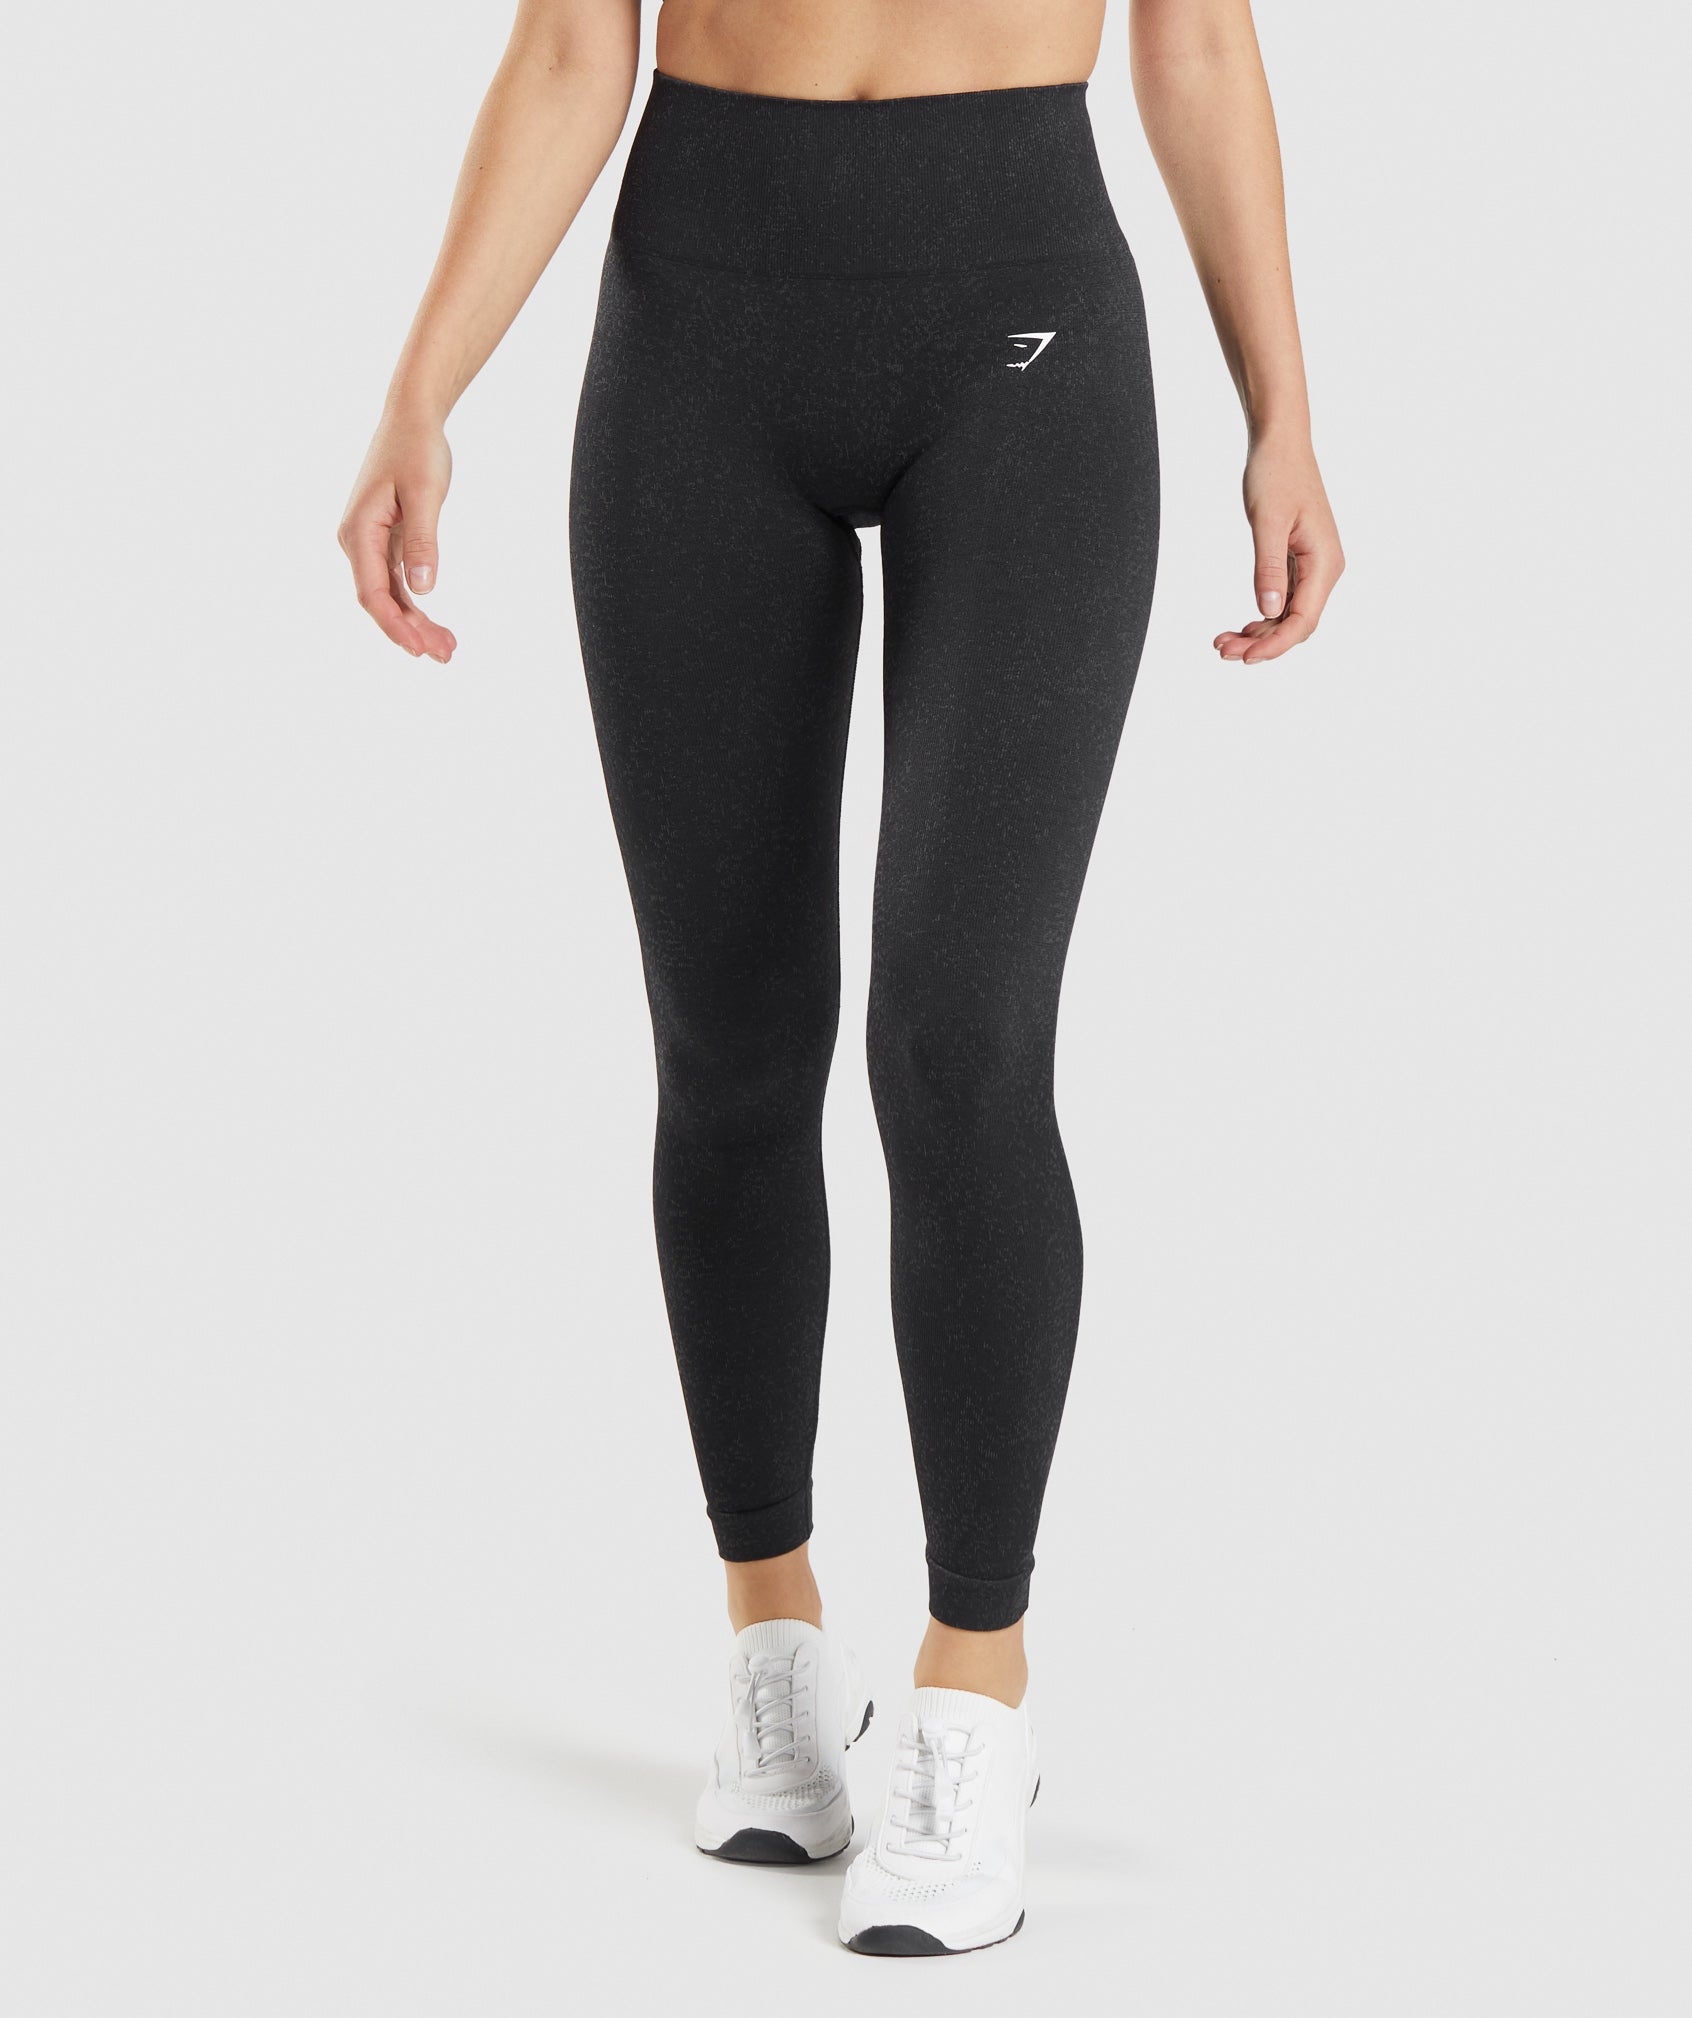 Gymshark Adapt fleck will get you feeling yourself for a strong sessi